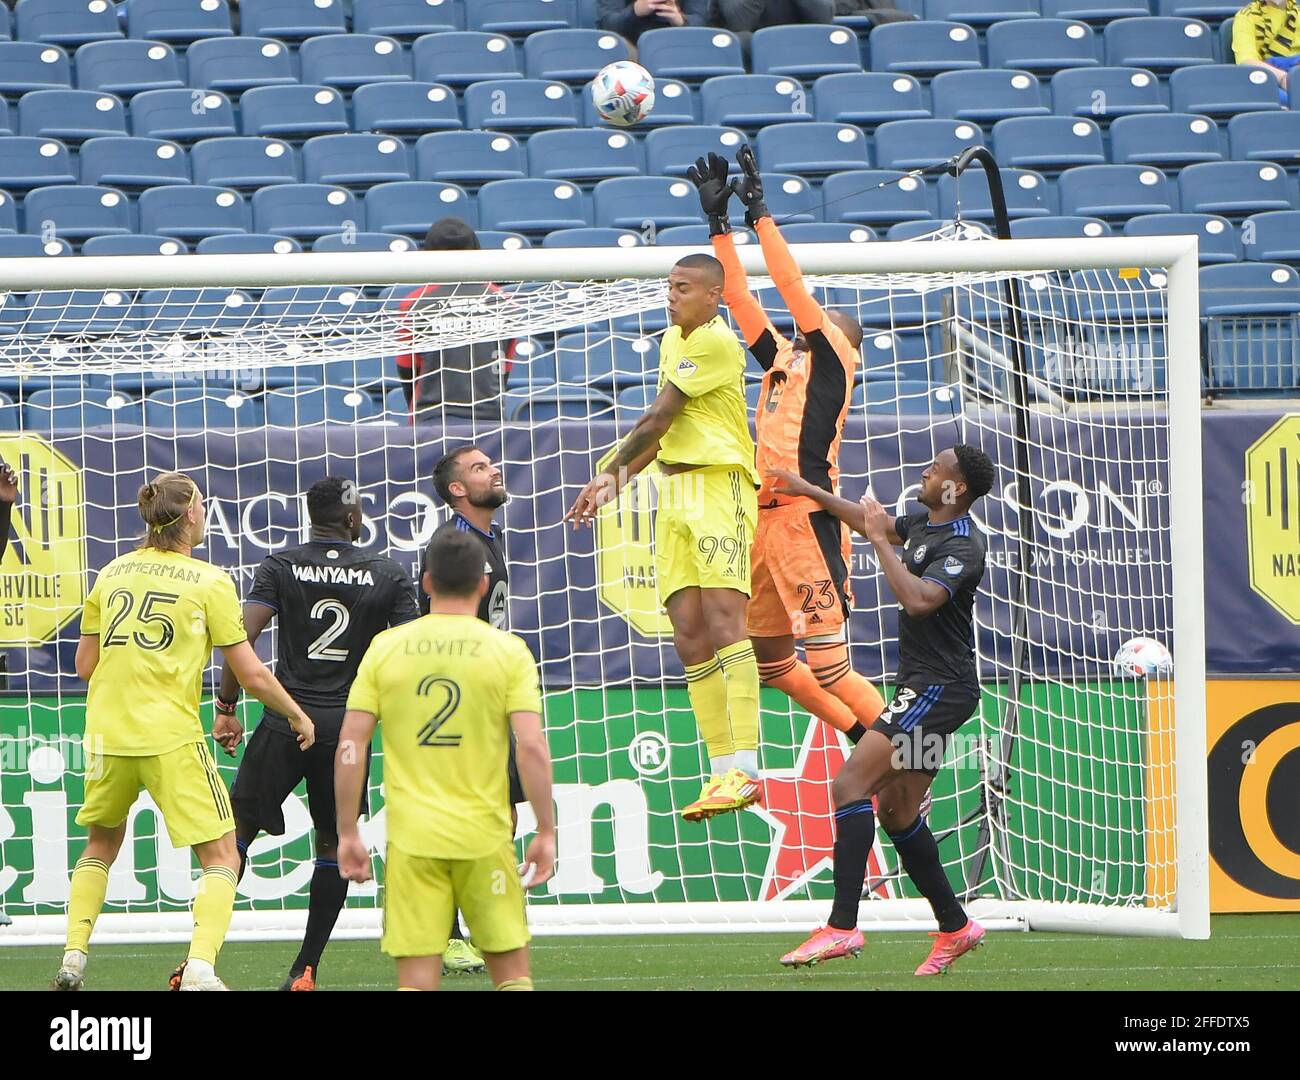 Nashville TN, USA. 24th Apr, 2021. CF MontrŽal goalkeeper Clement Diop (23) blocks the ball as Nashville SC forward Jhonder Cadiz (99) tries to head the ball during the second half of an MLS game between the FC Montreal and the Nashville SC at Nissan Stadium in Nashville TN. Credit: csm/Alamy Live News Stock Photo